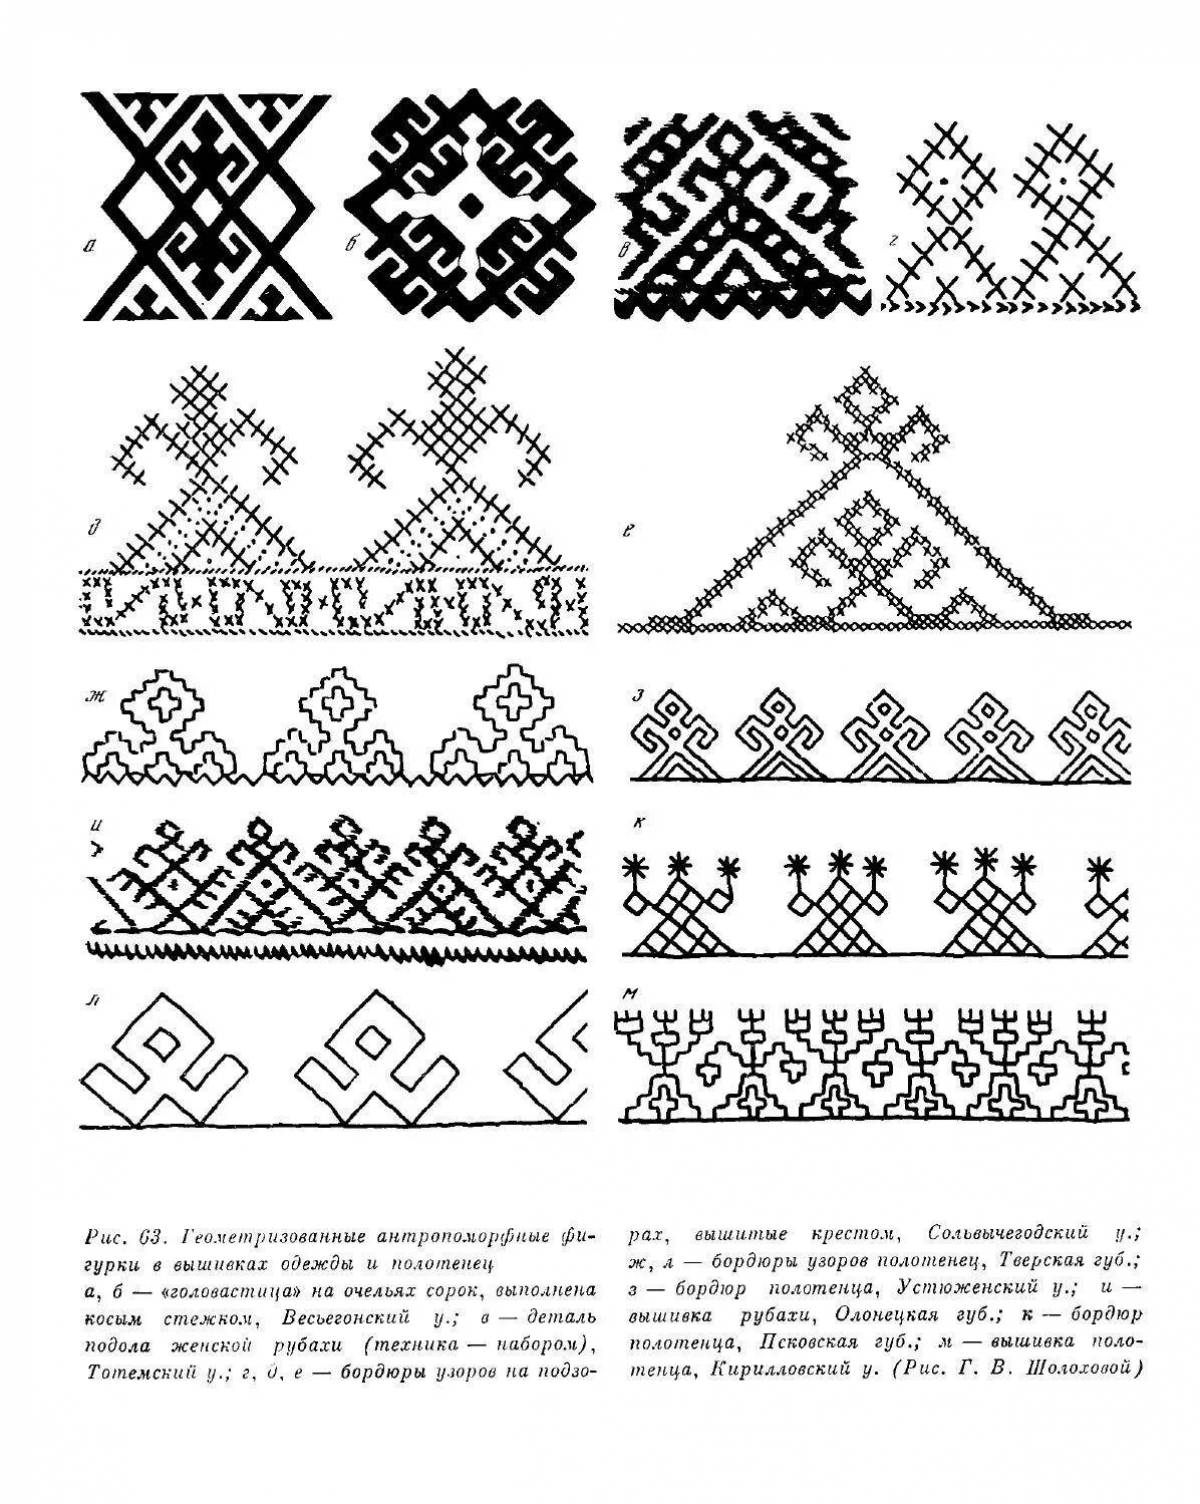 Playful Belarusian coloring book for children